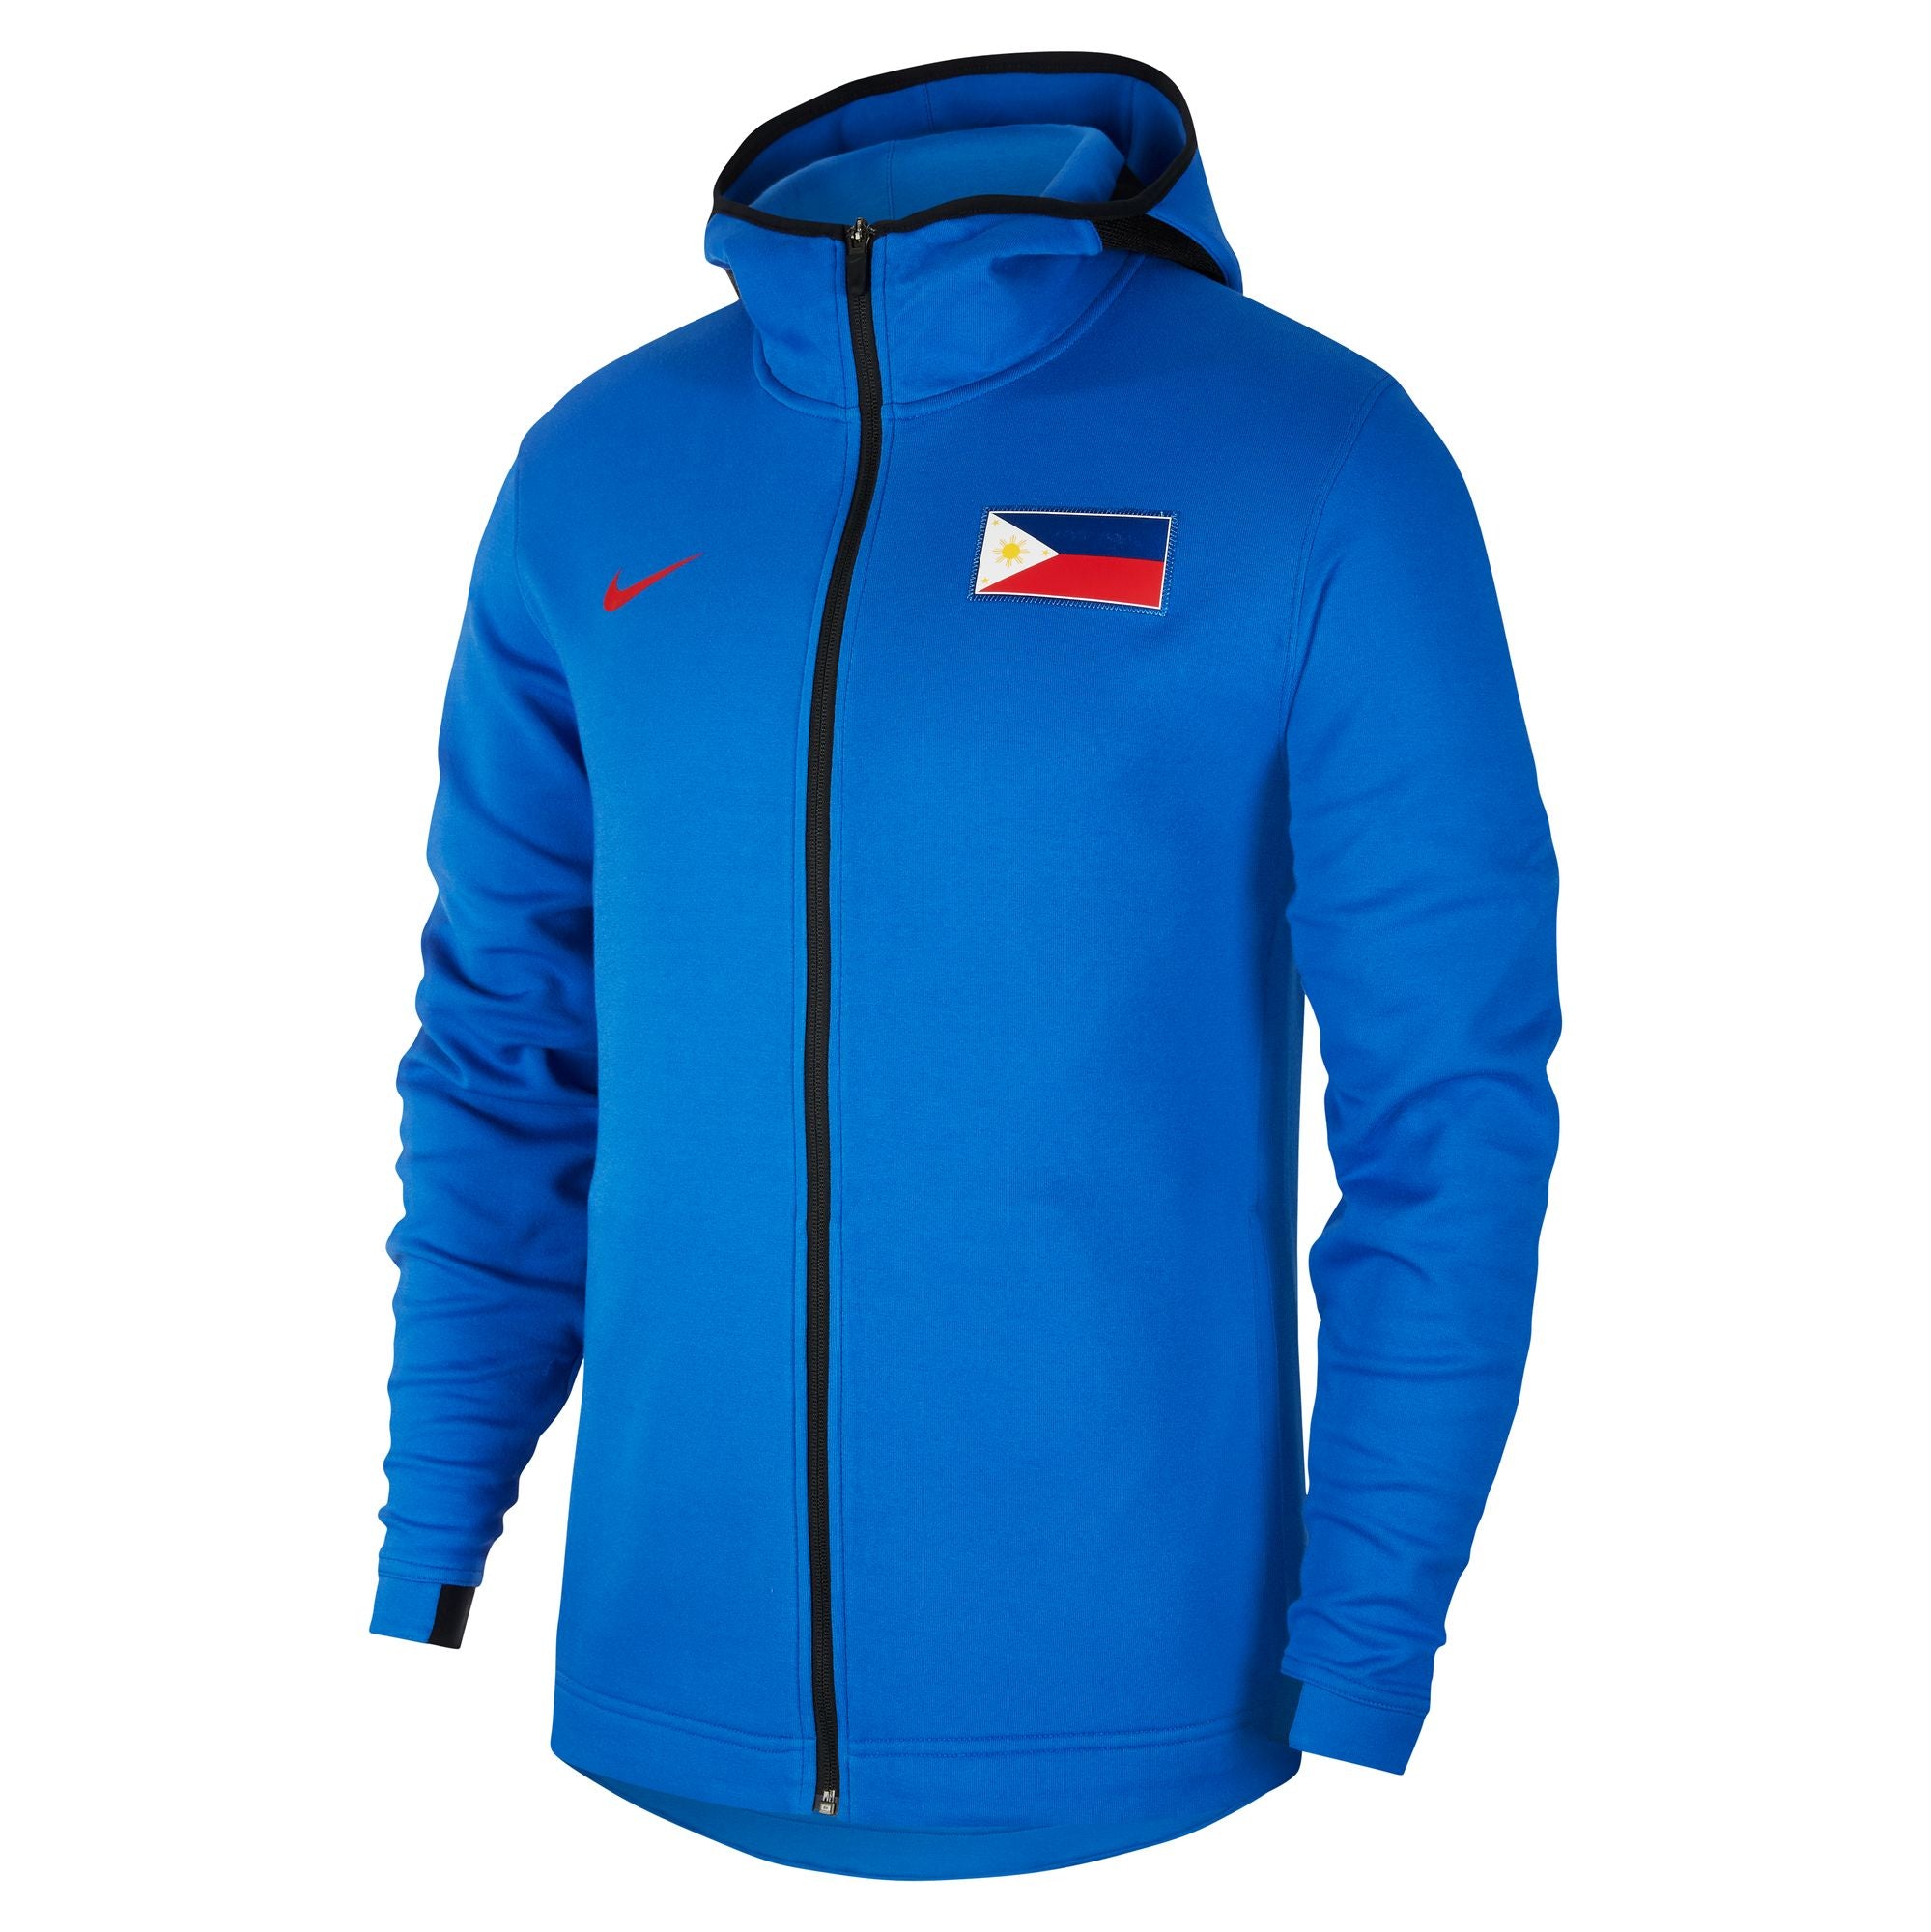 PHILIPPINES NIKE DRI-FIT SHOWTIME MEN’S BASKETBALL HOODIE